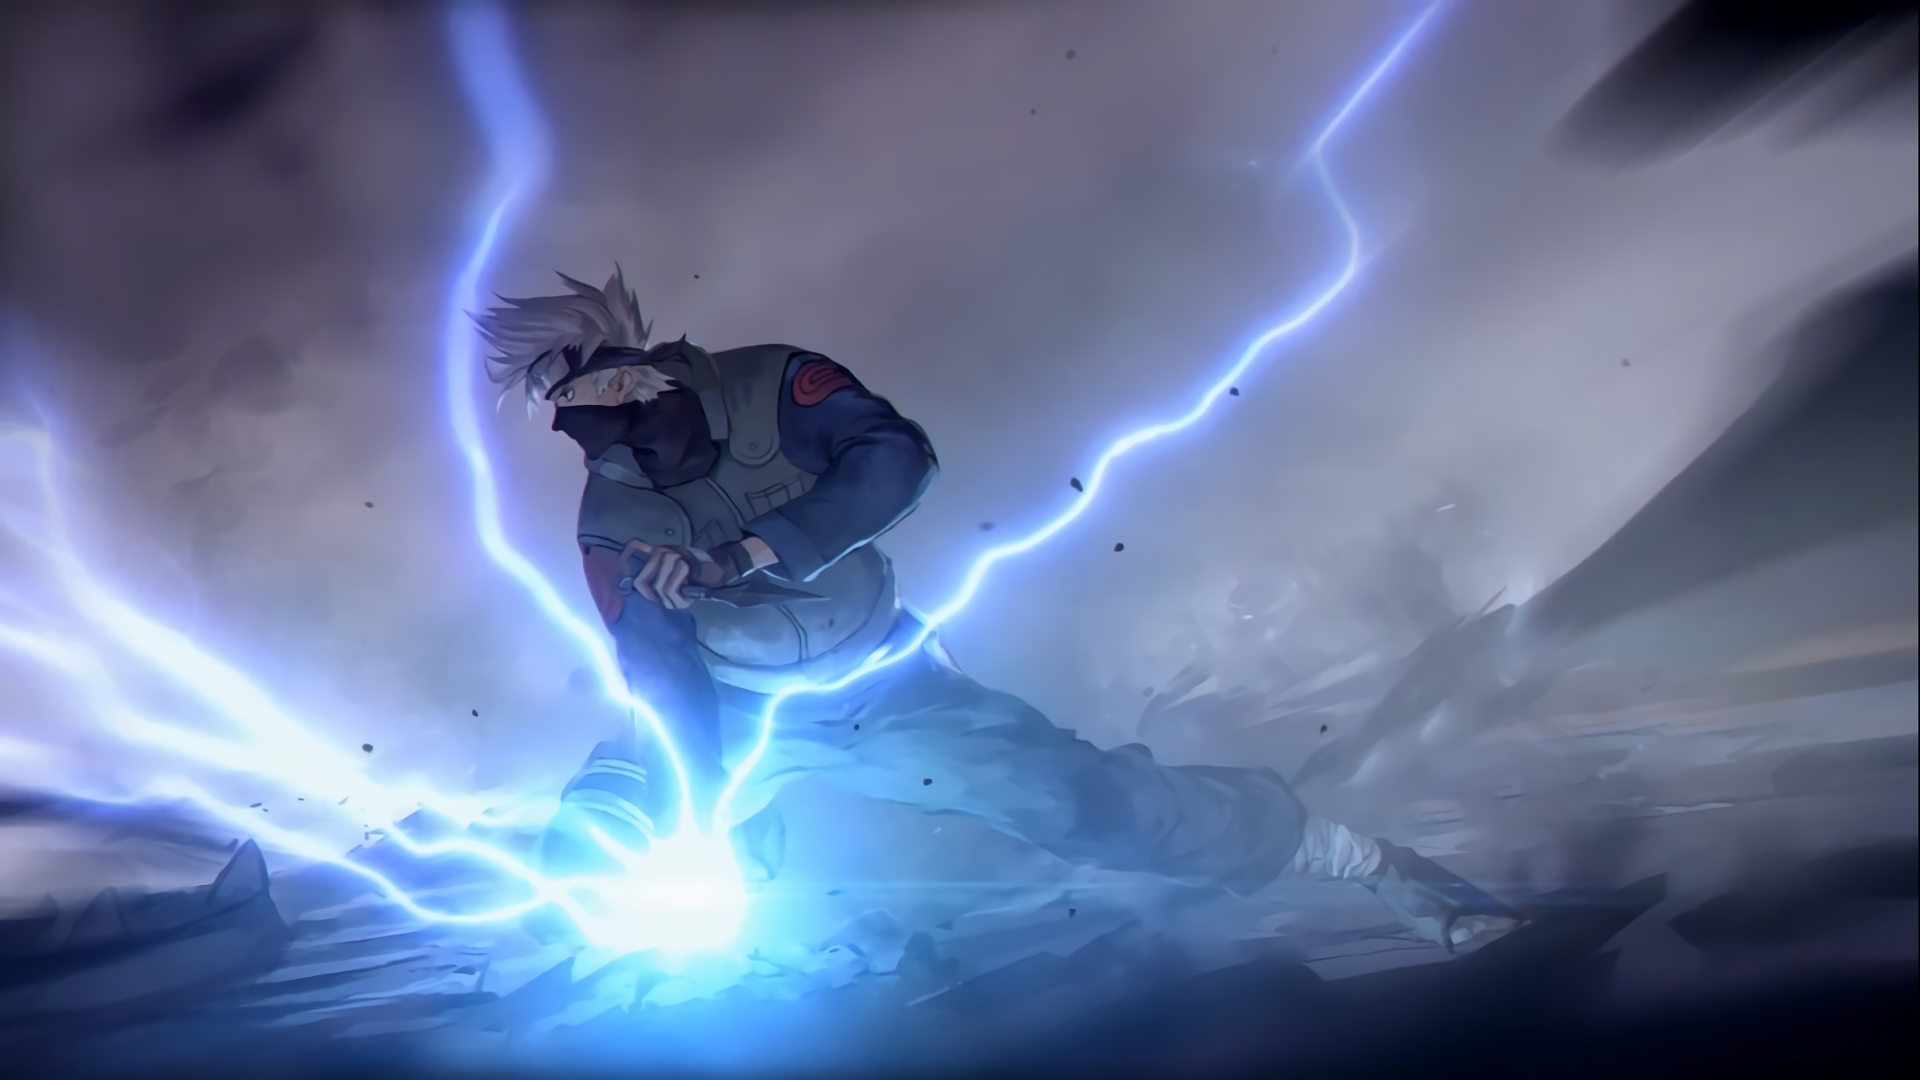 Kakashi Hatake Wallpaper Background Image. View, download, comment, and rate. Best naruto wallpaper, 1080p anime wallpaper, Anime background